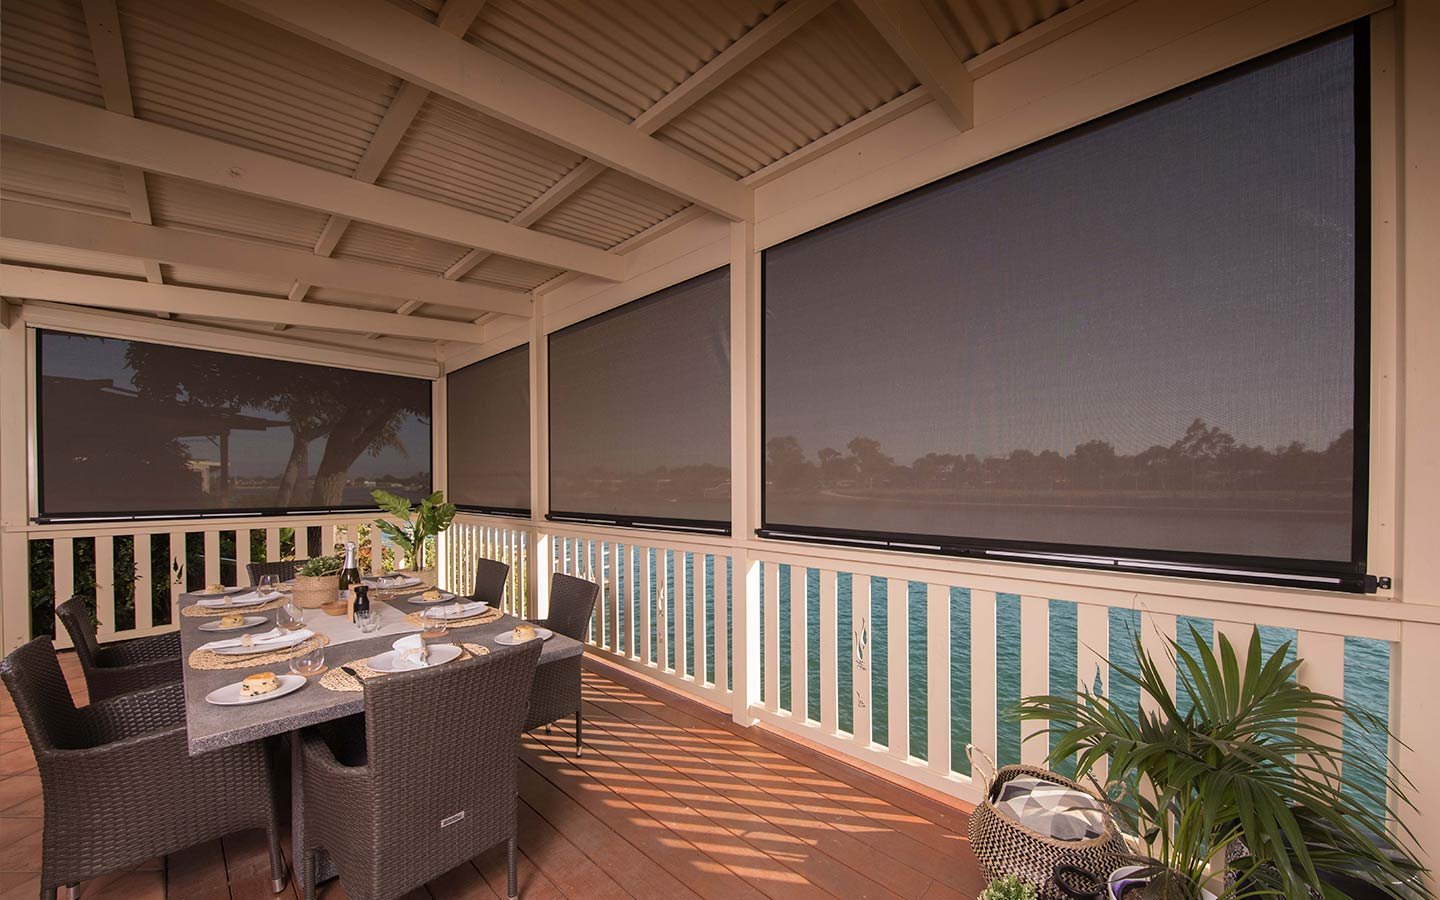 Indoors Outdoors Blinds & Shades